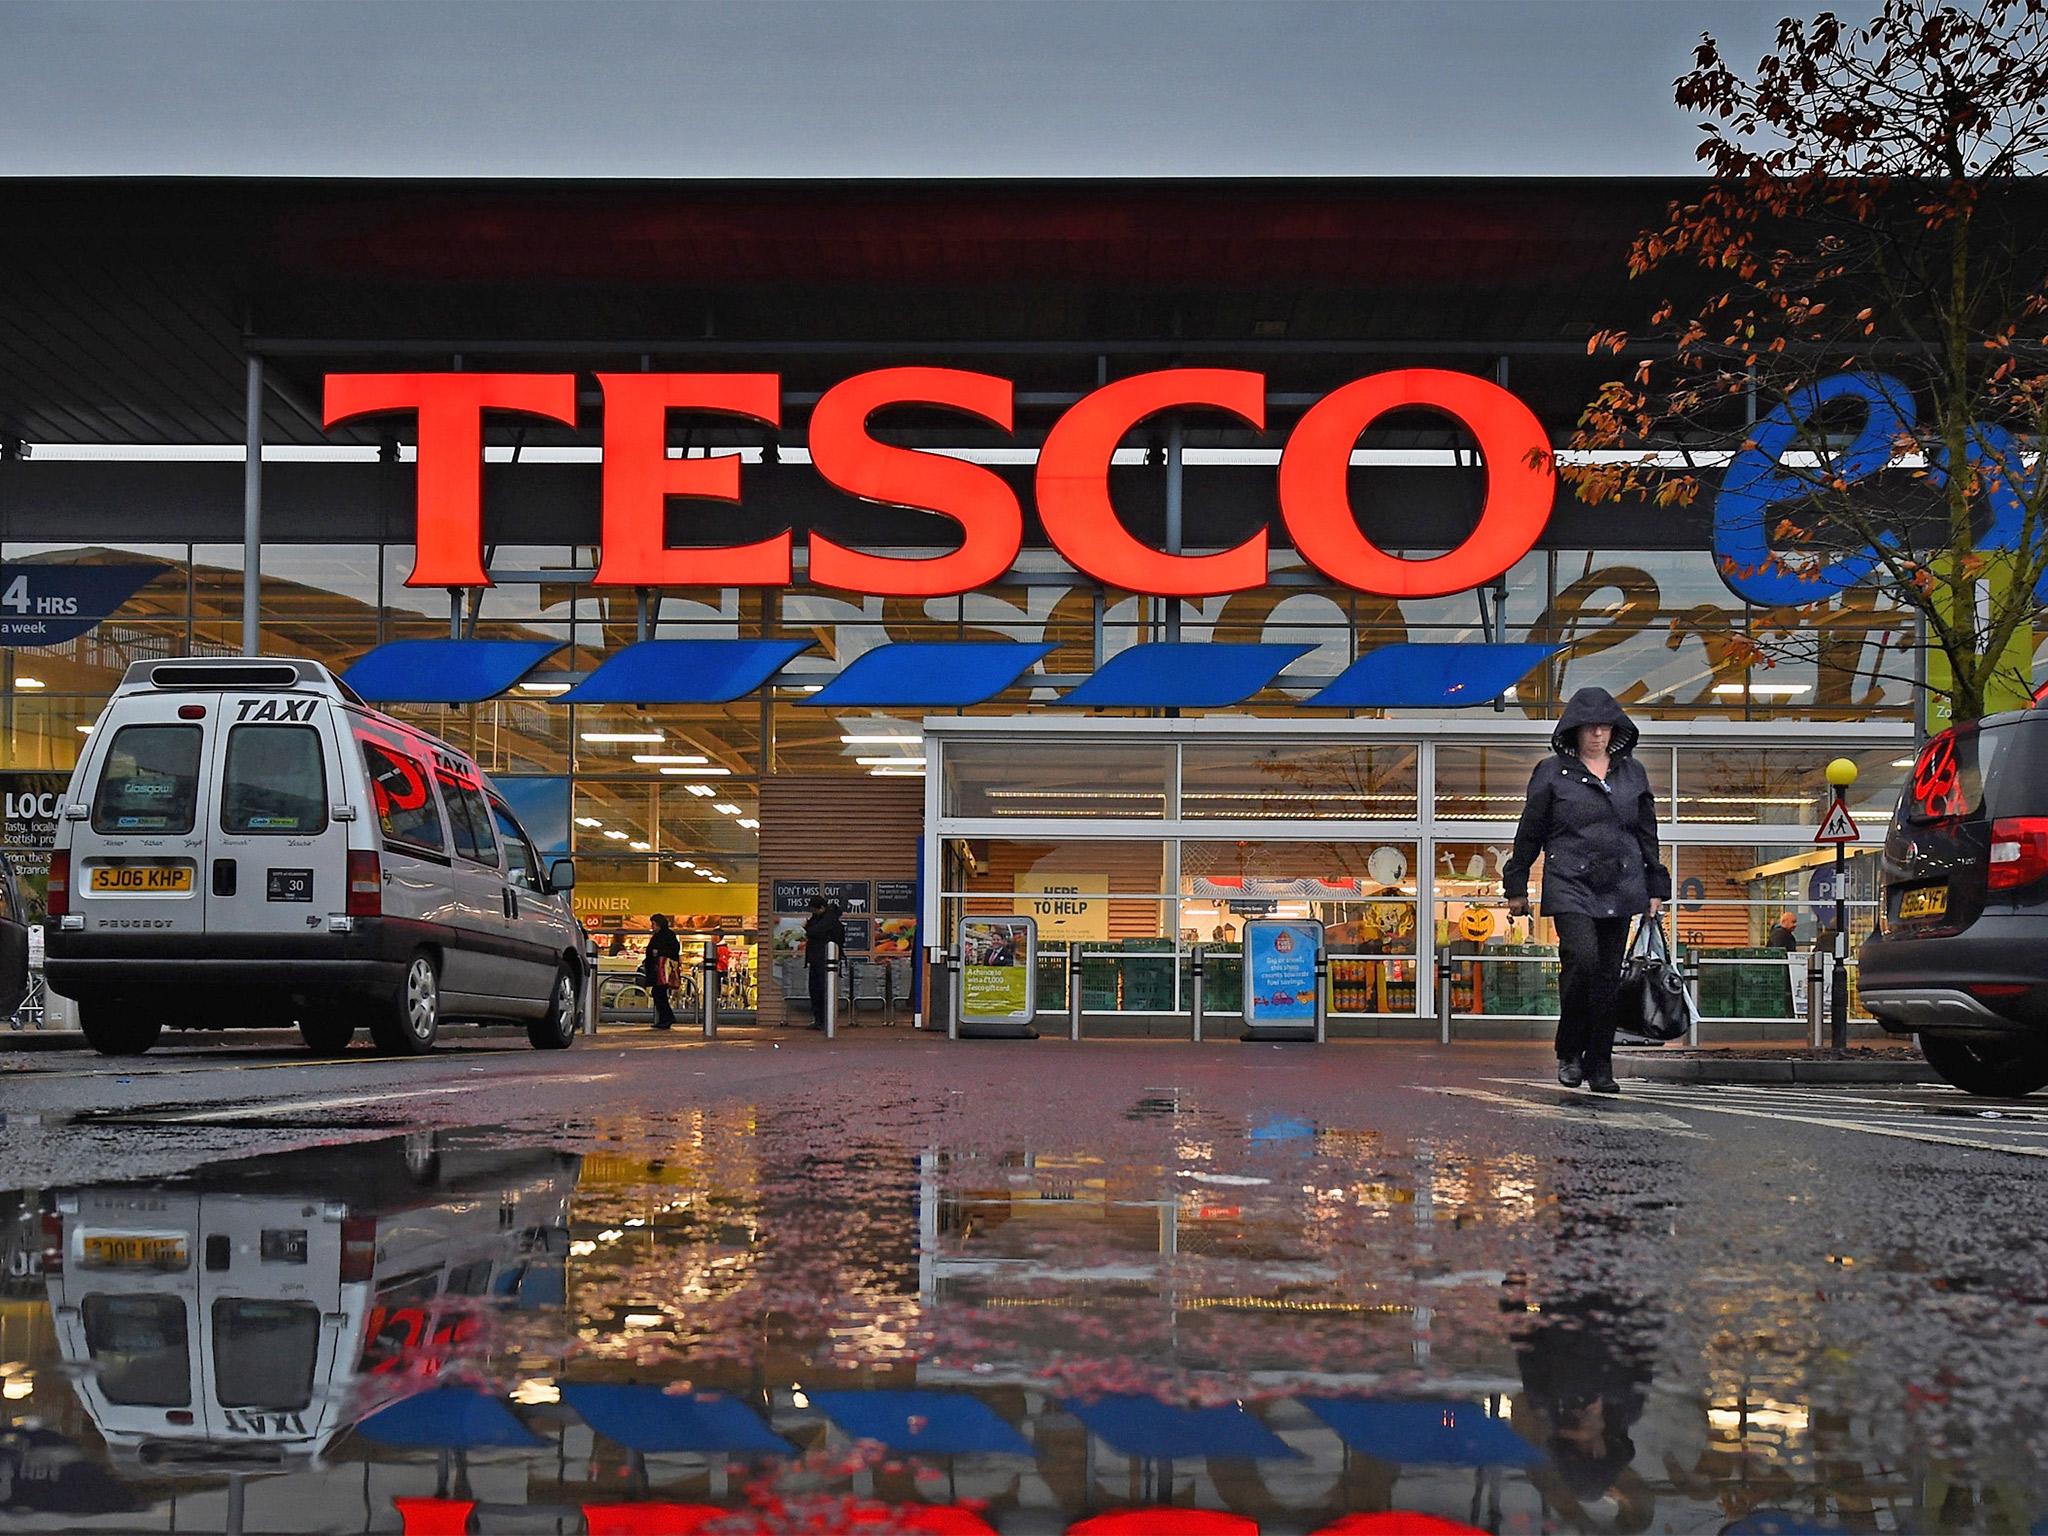 In the 1990s, Tesco shifted upmarket. Now it must make another transition